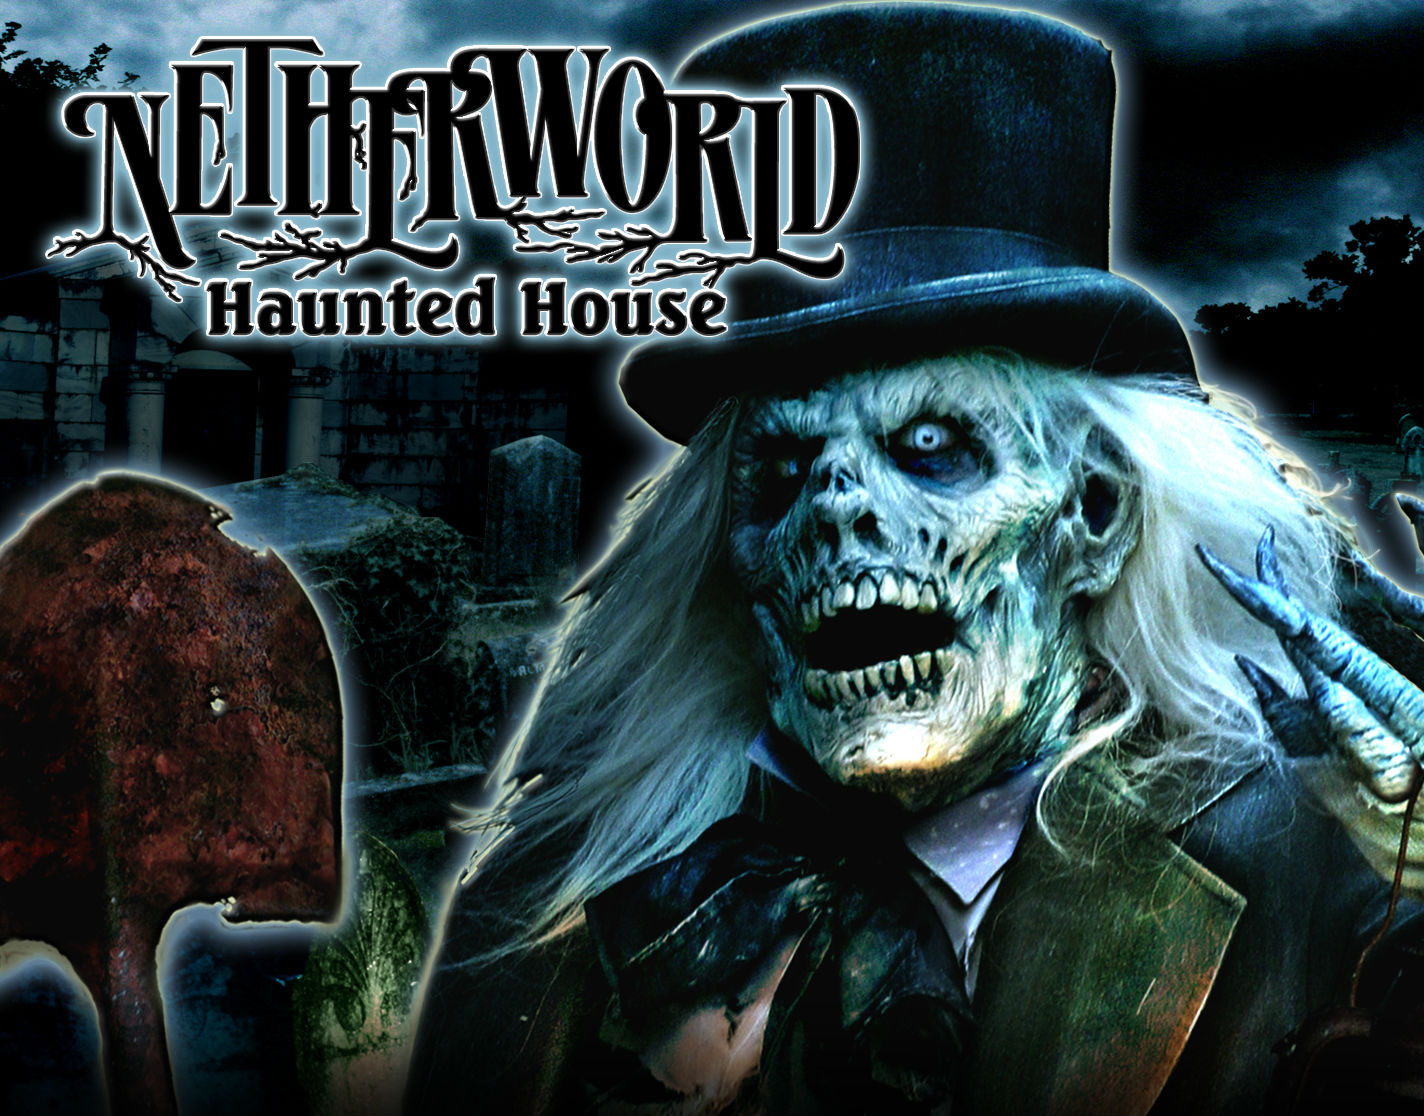 Haunted Wallpaper by © NETHERWORLD Haunted House